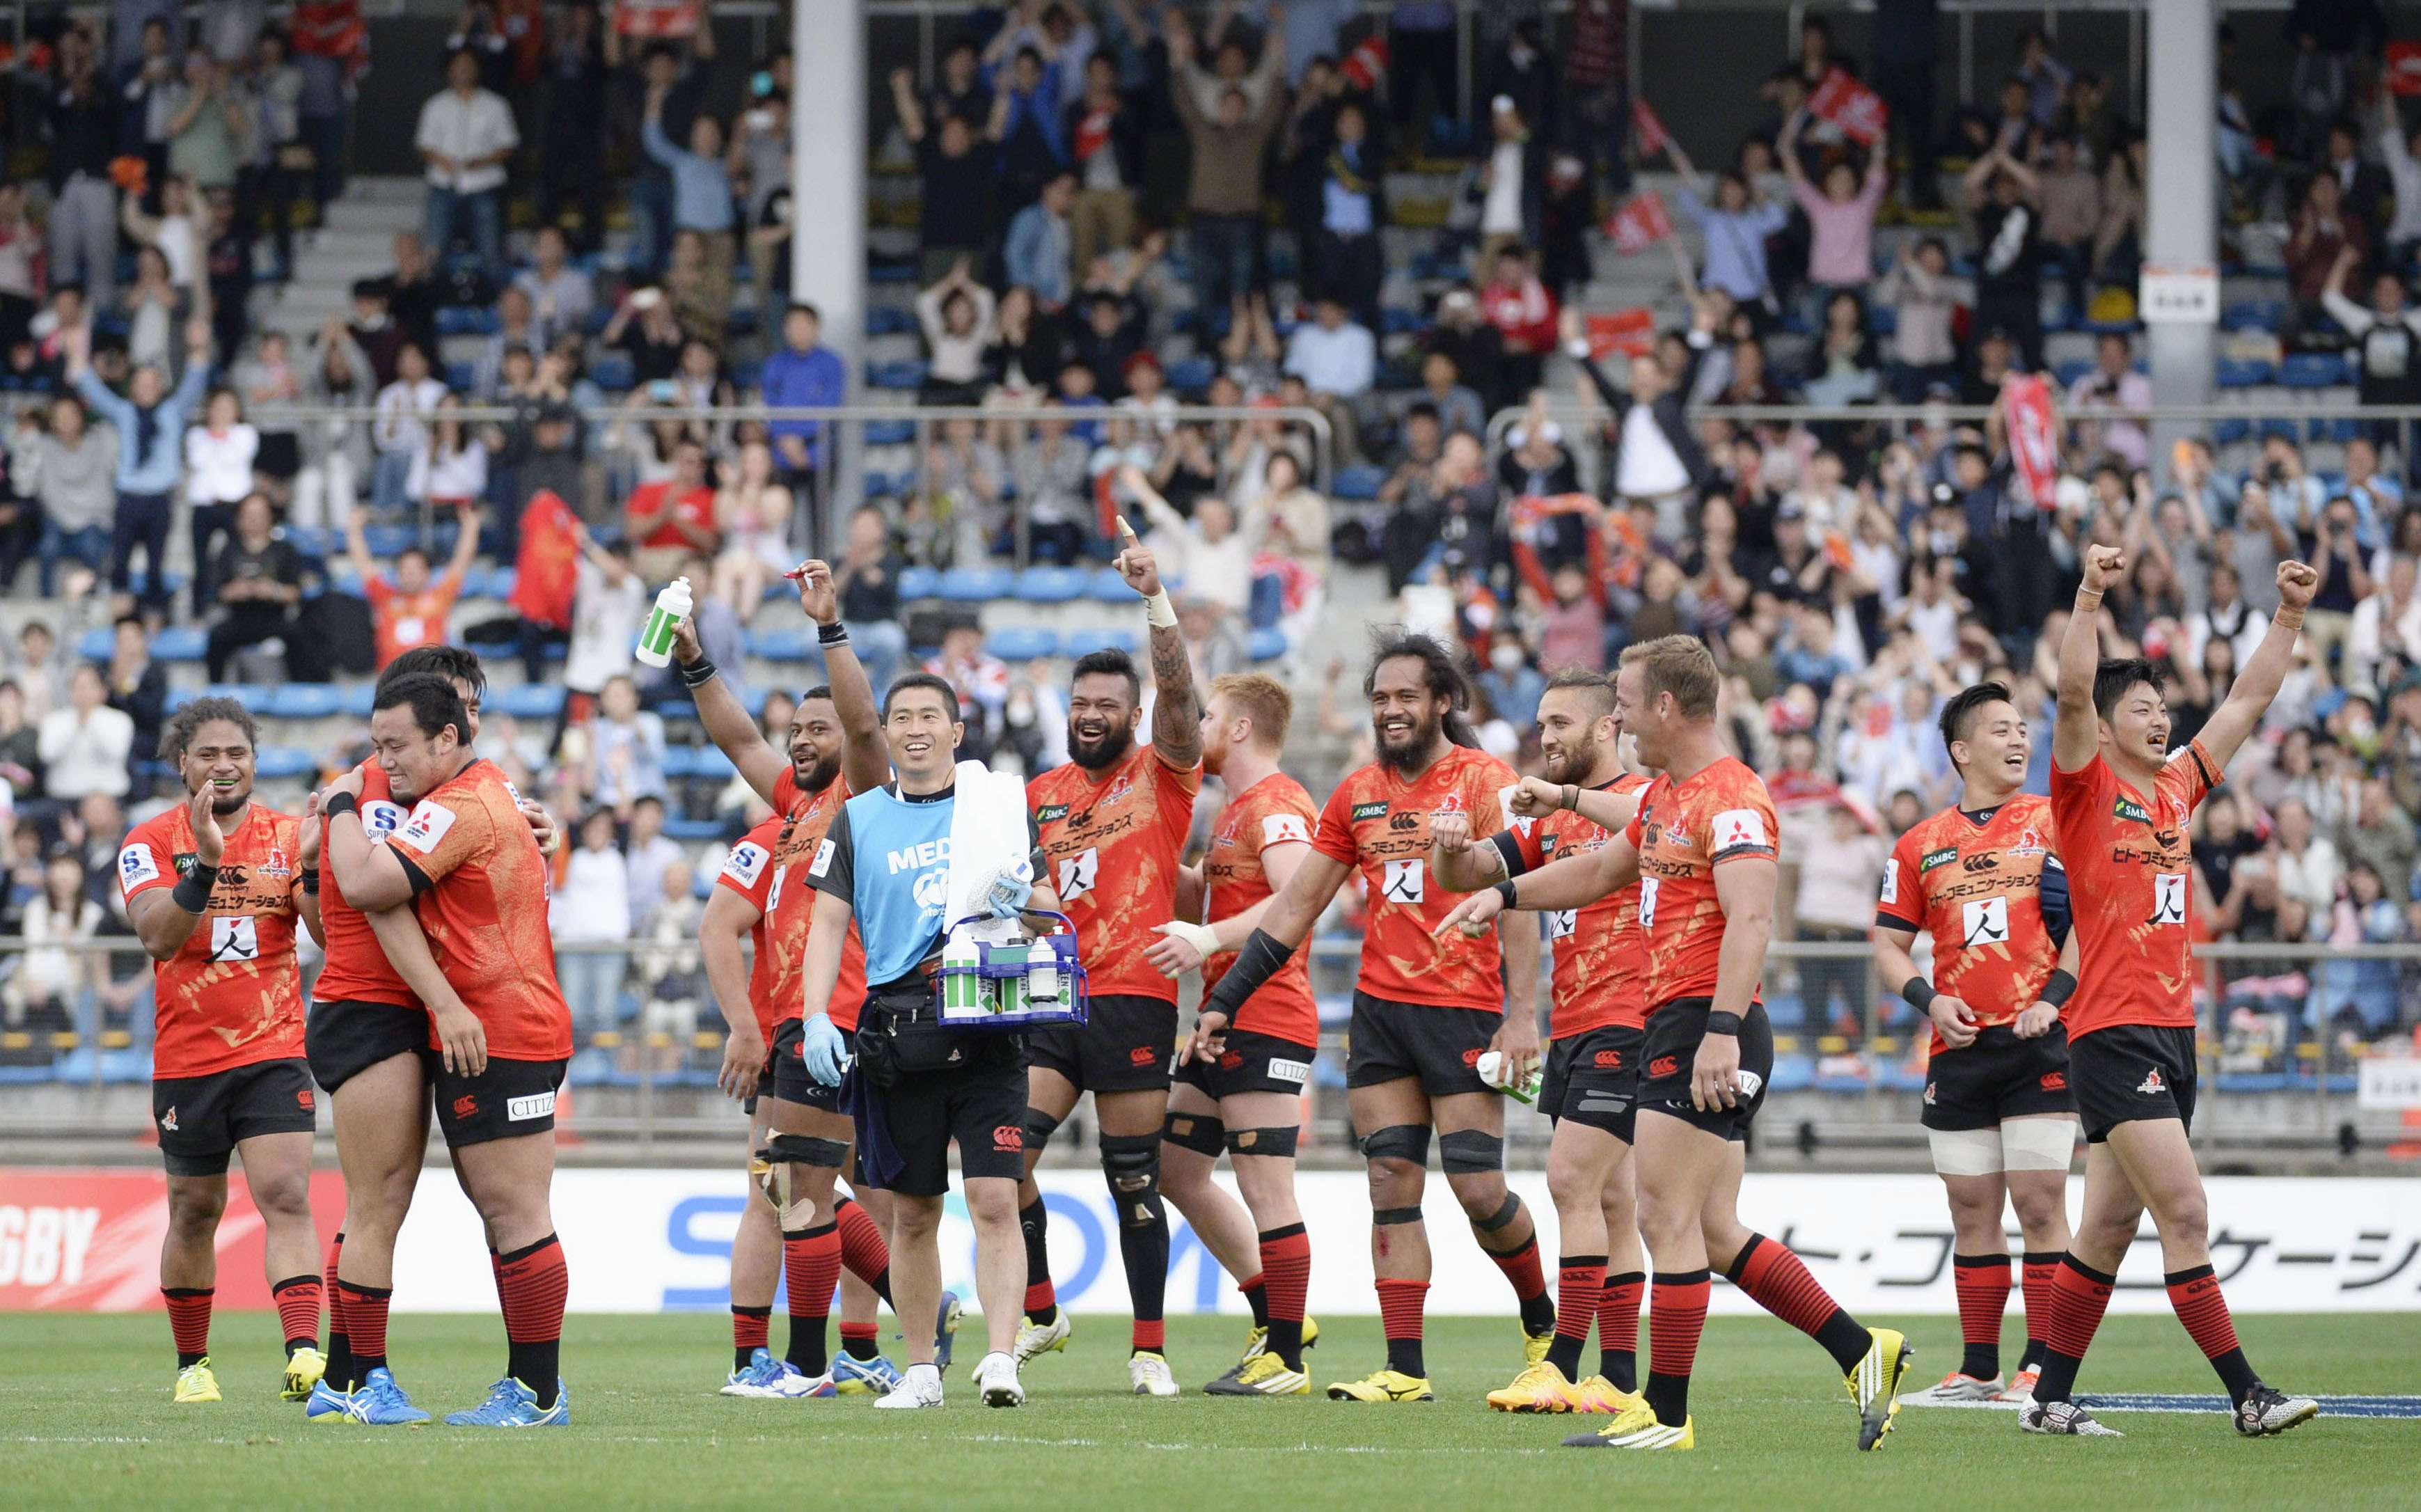 The Sunwolves celebrate after defeating the Jaguares 36-28 at Prince Chichibu Memorial Rugby Ground in Tokyo on Saturday for their first Super Rugby win. Photo: Kyodo